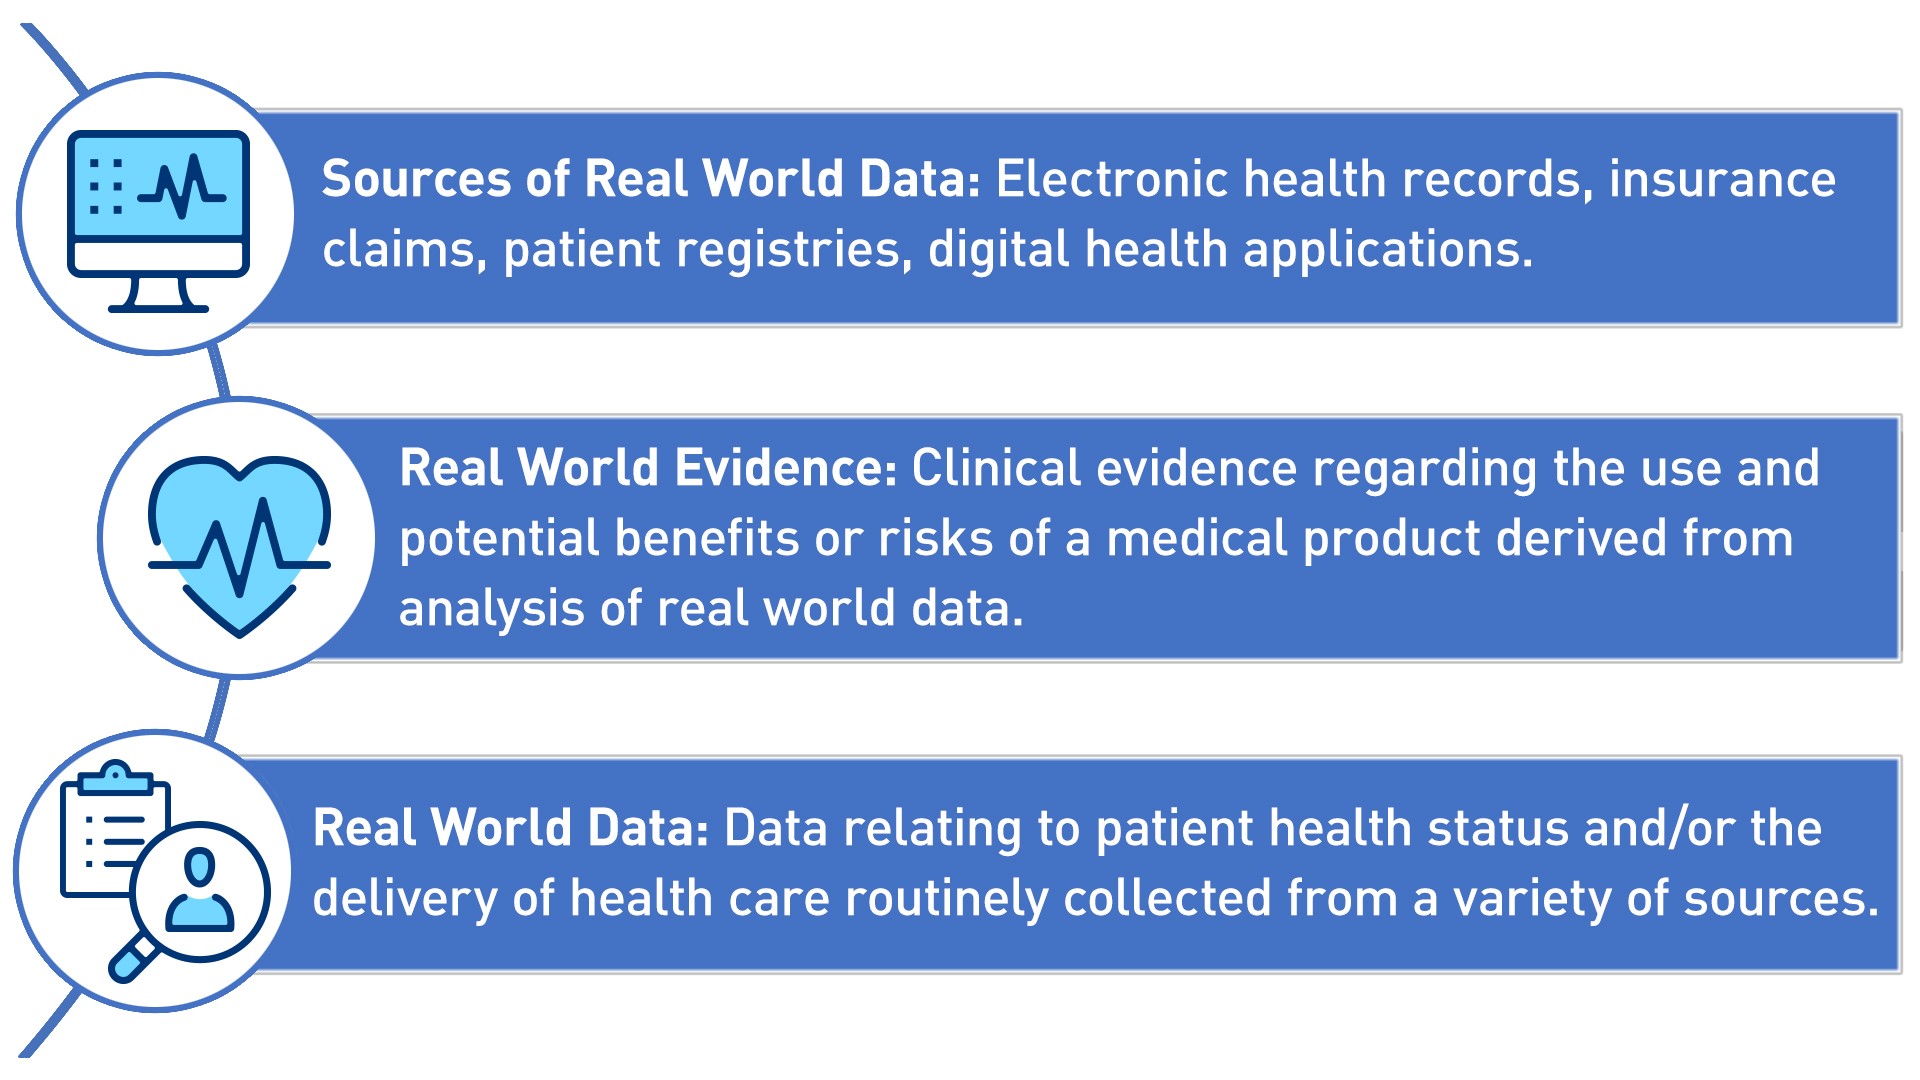 Sources of Real World Data